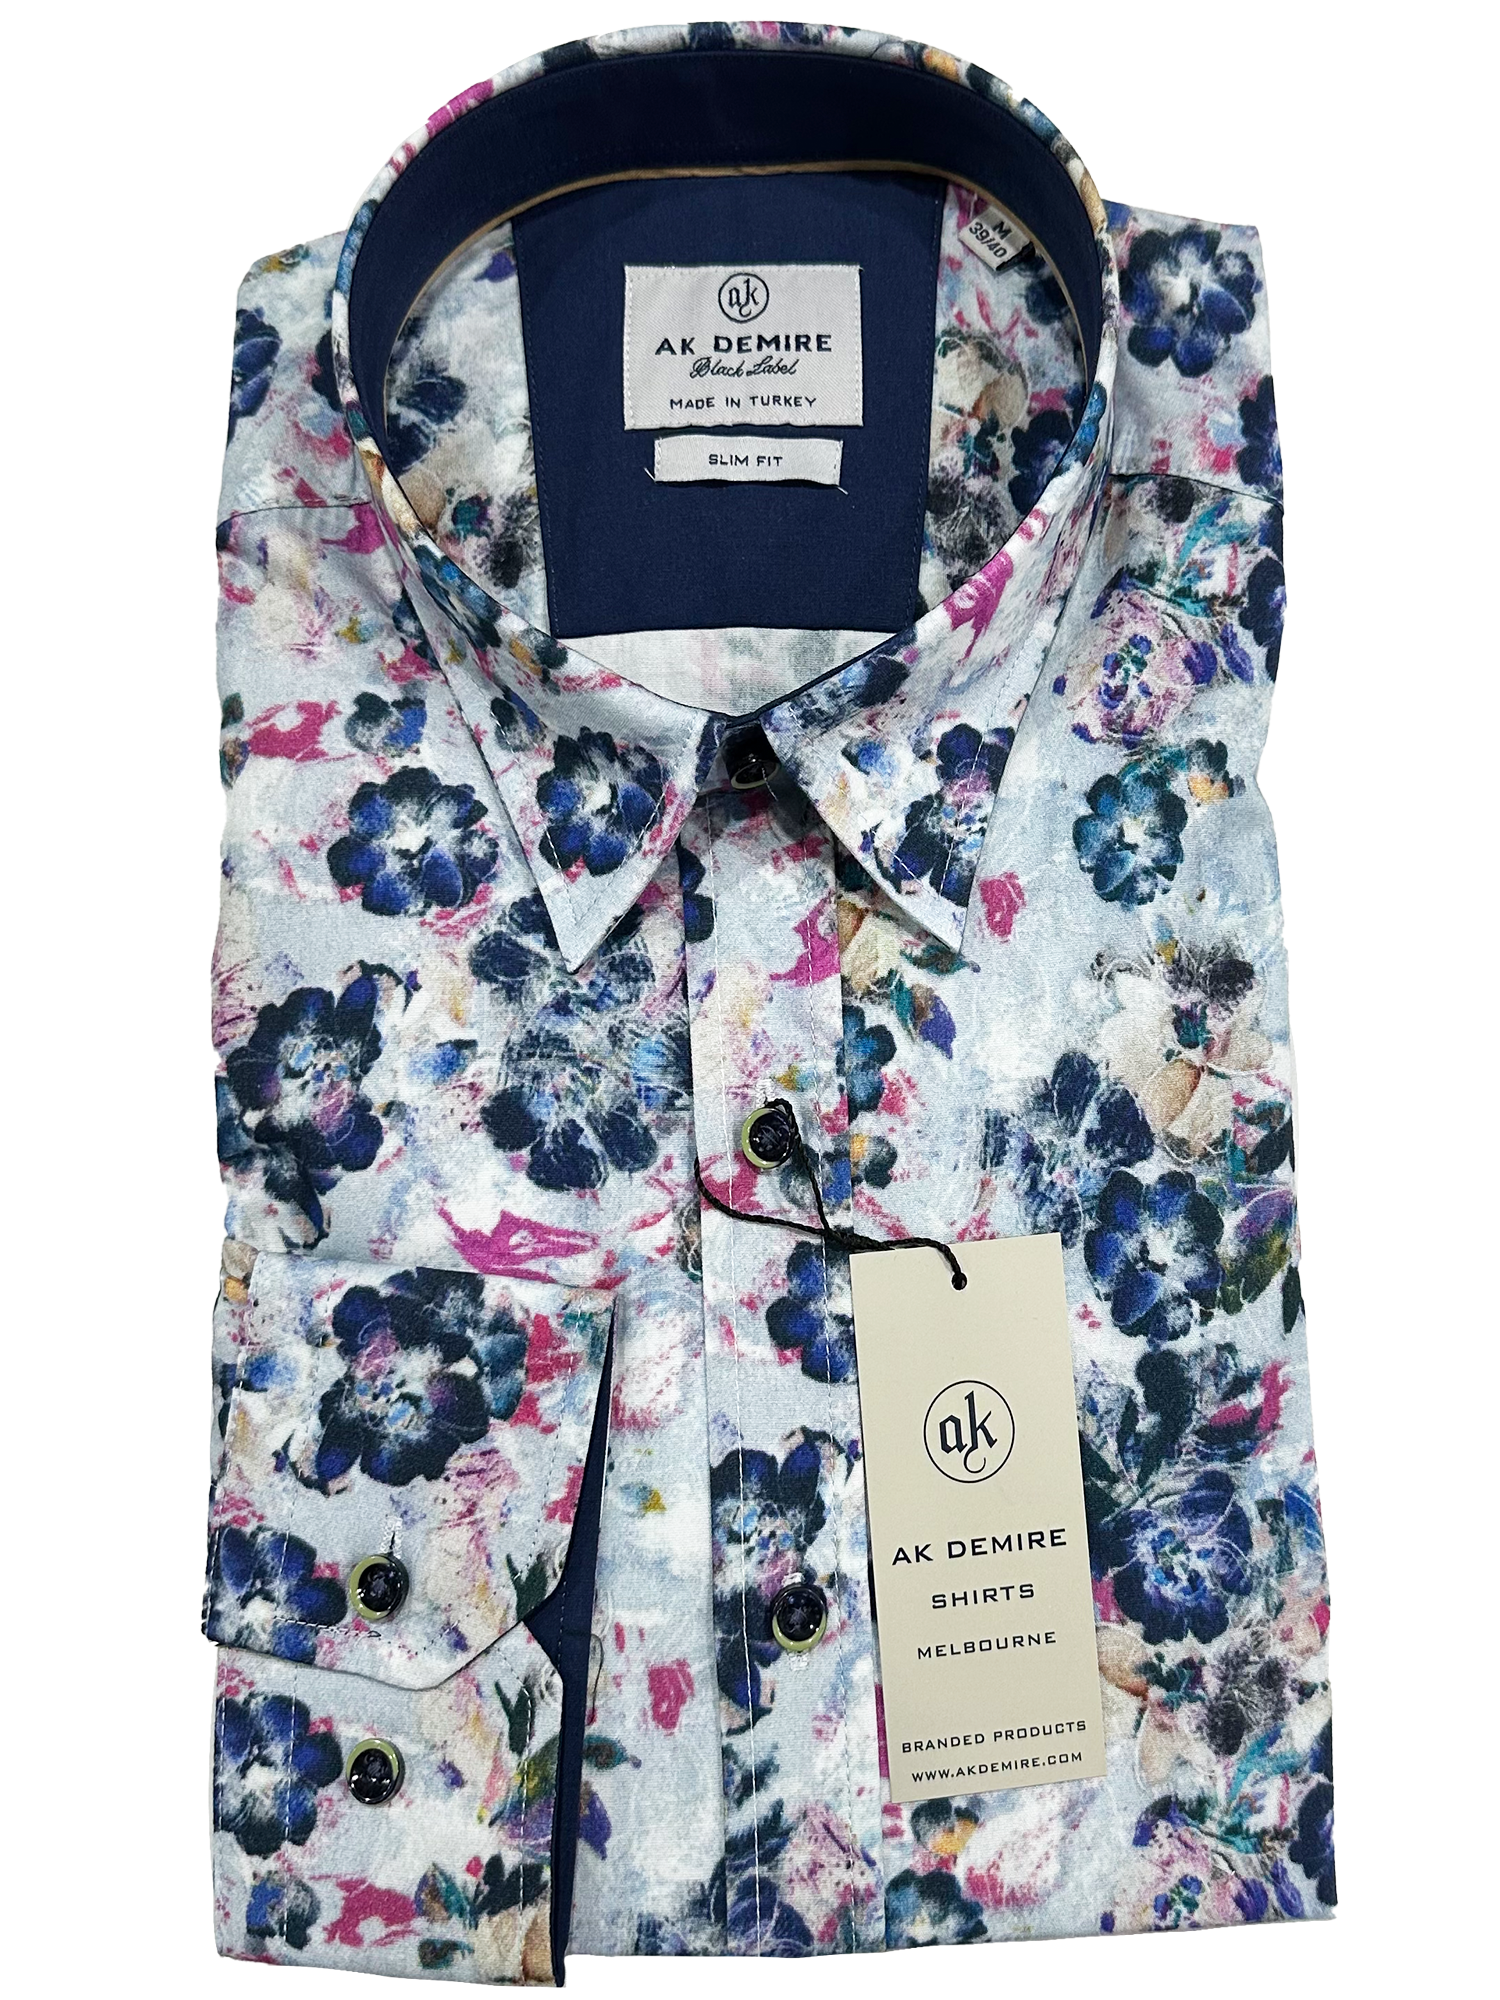 AKTB-236  https://harrysformenswear.com.au/products/aktb-237  Men's Regular Fit Shirt. Designed for fuller-figured men using delicate imported fabrics. Bamboo and microfibre for wrinkle-free fabric, breathable, anti-UV & anti-bacterial. Includes a chest pocket.